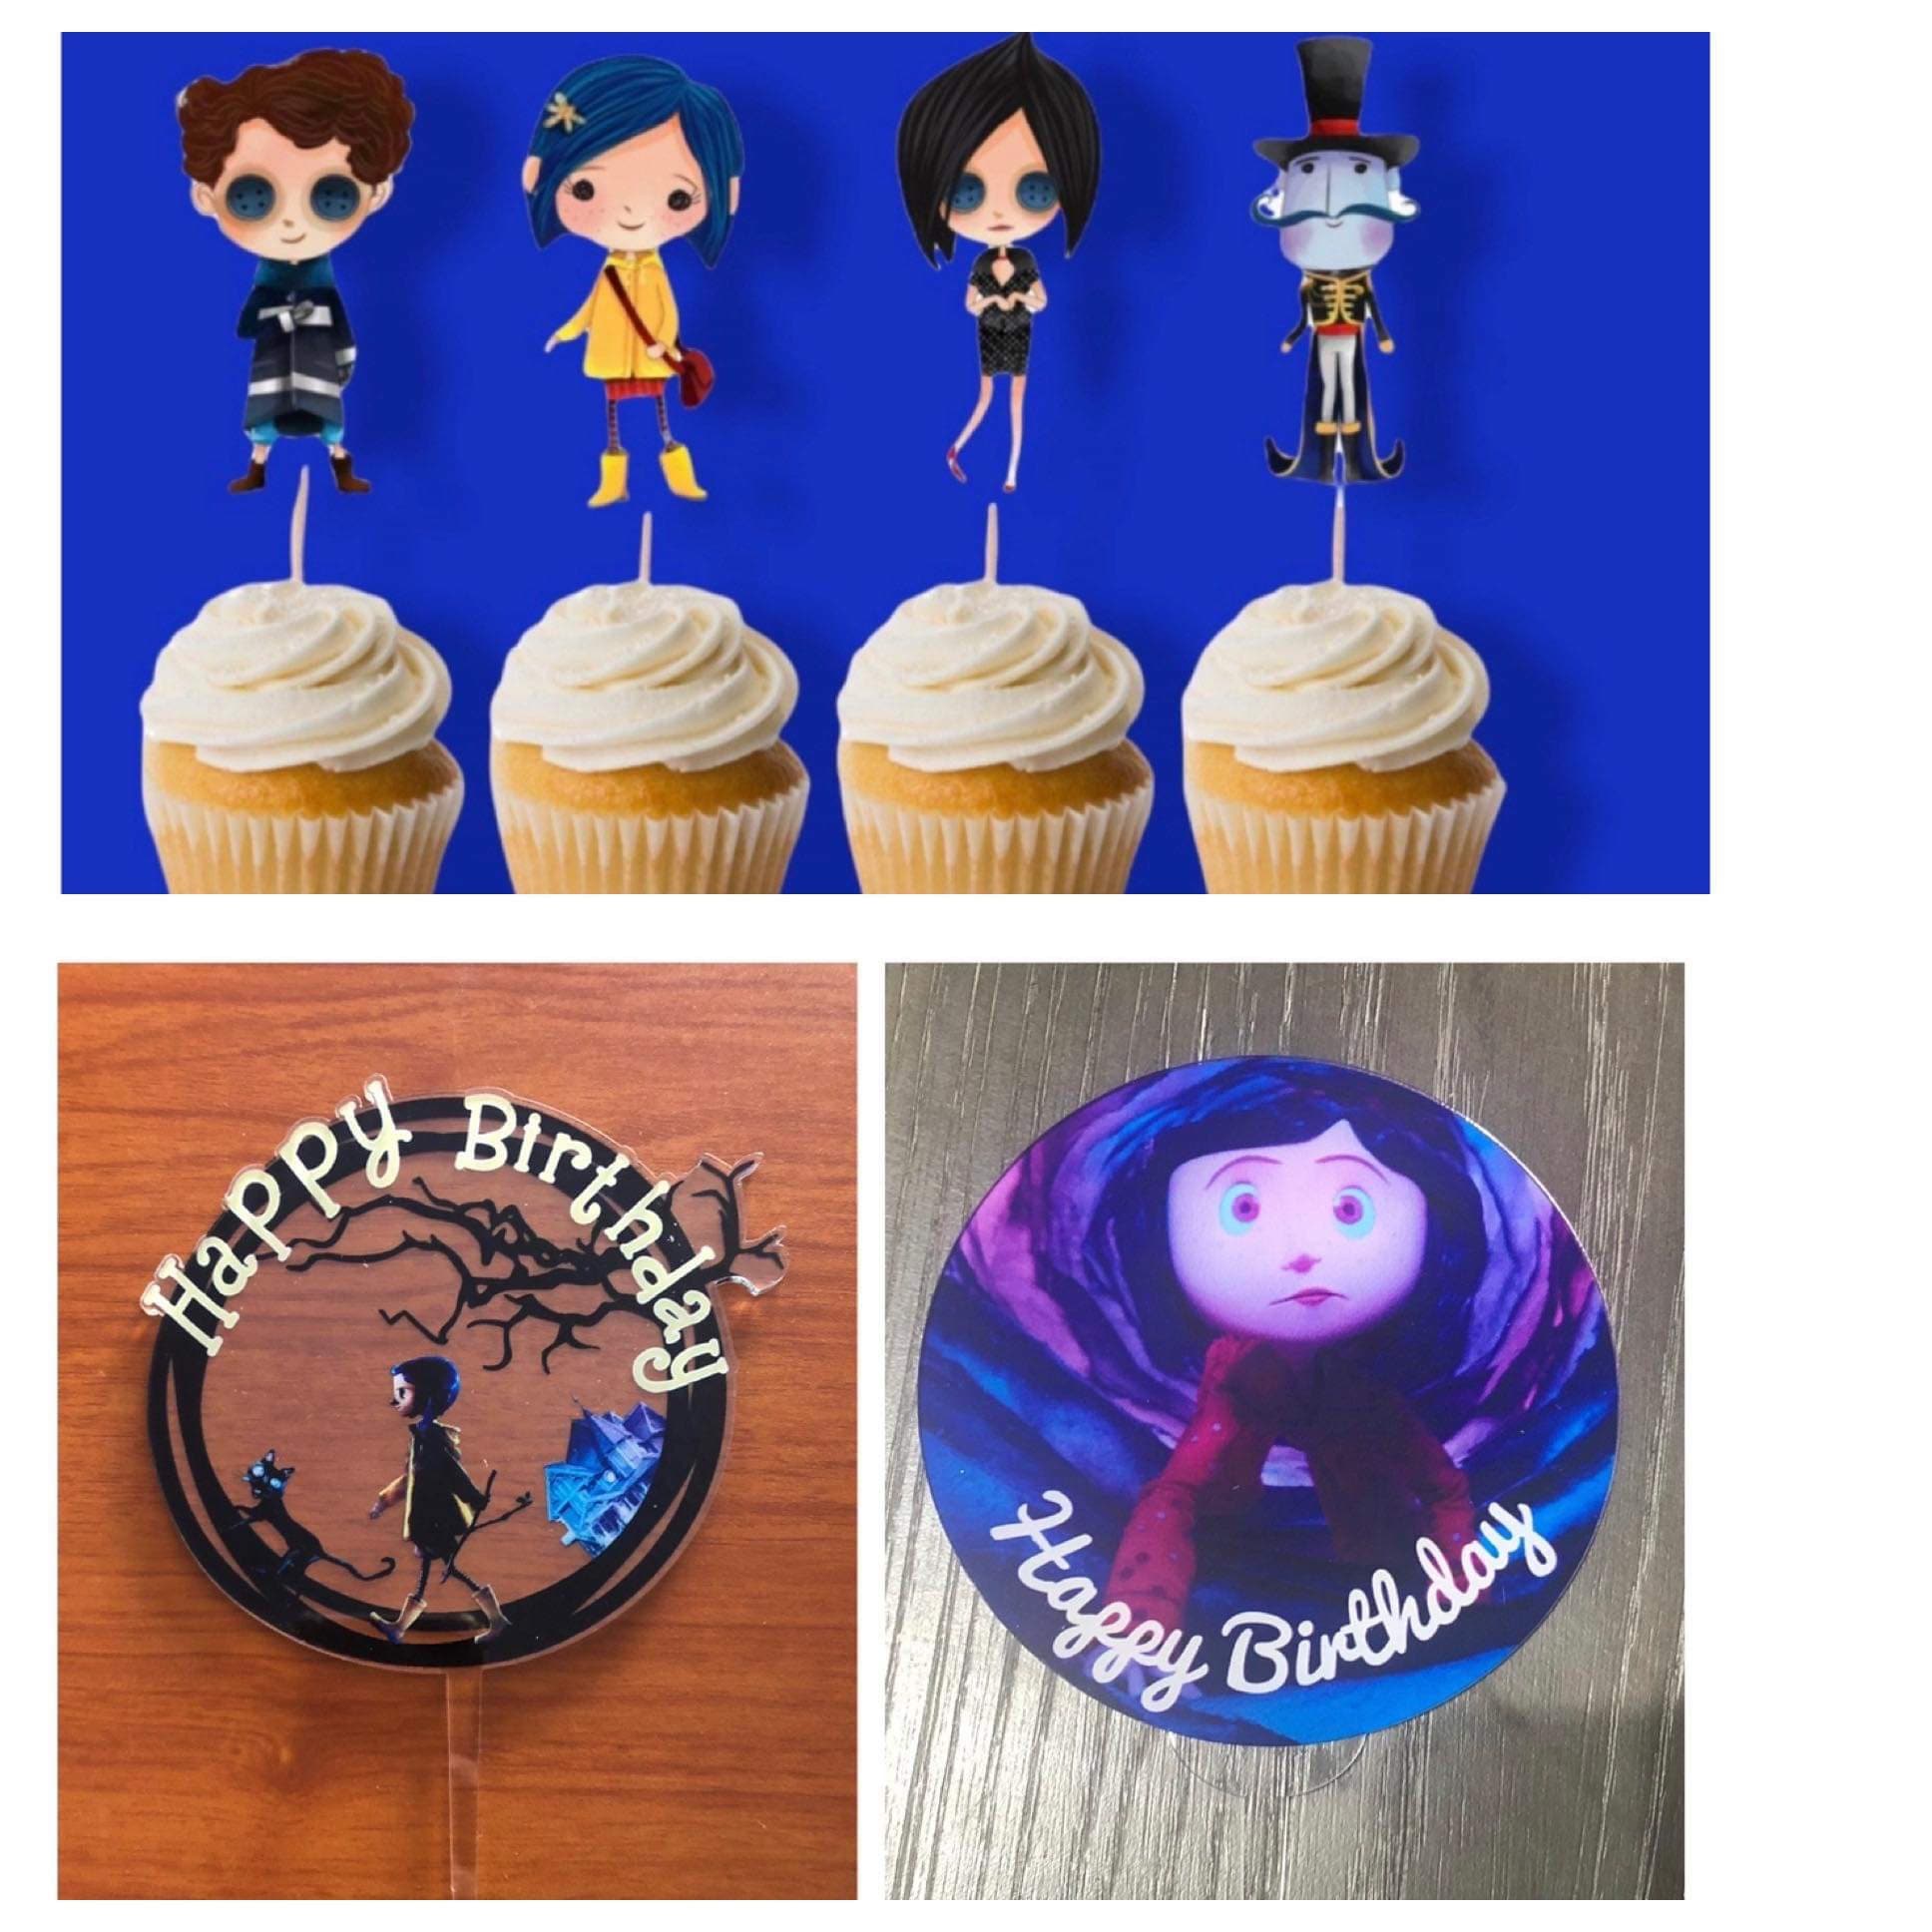 Coraline Birthday Party Supplies, Coraline Theme Birthday Party  Decorations, Includes Cupcake Toppers Banner ,18 Balloons and Coraline  Swirls,Cute